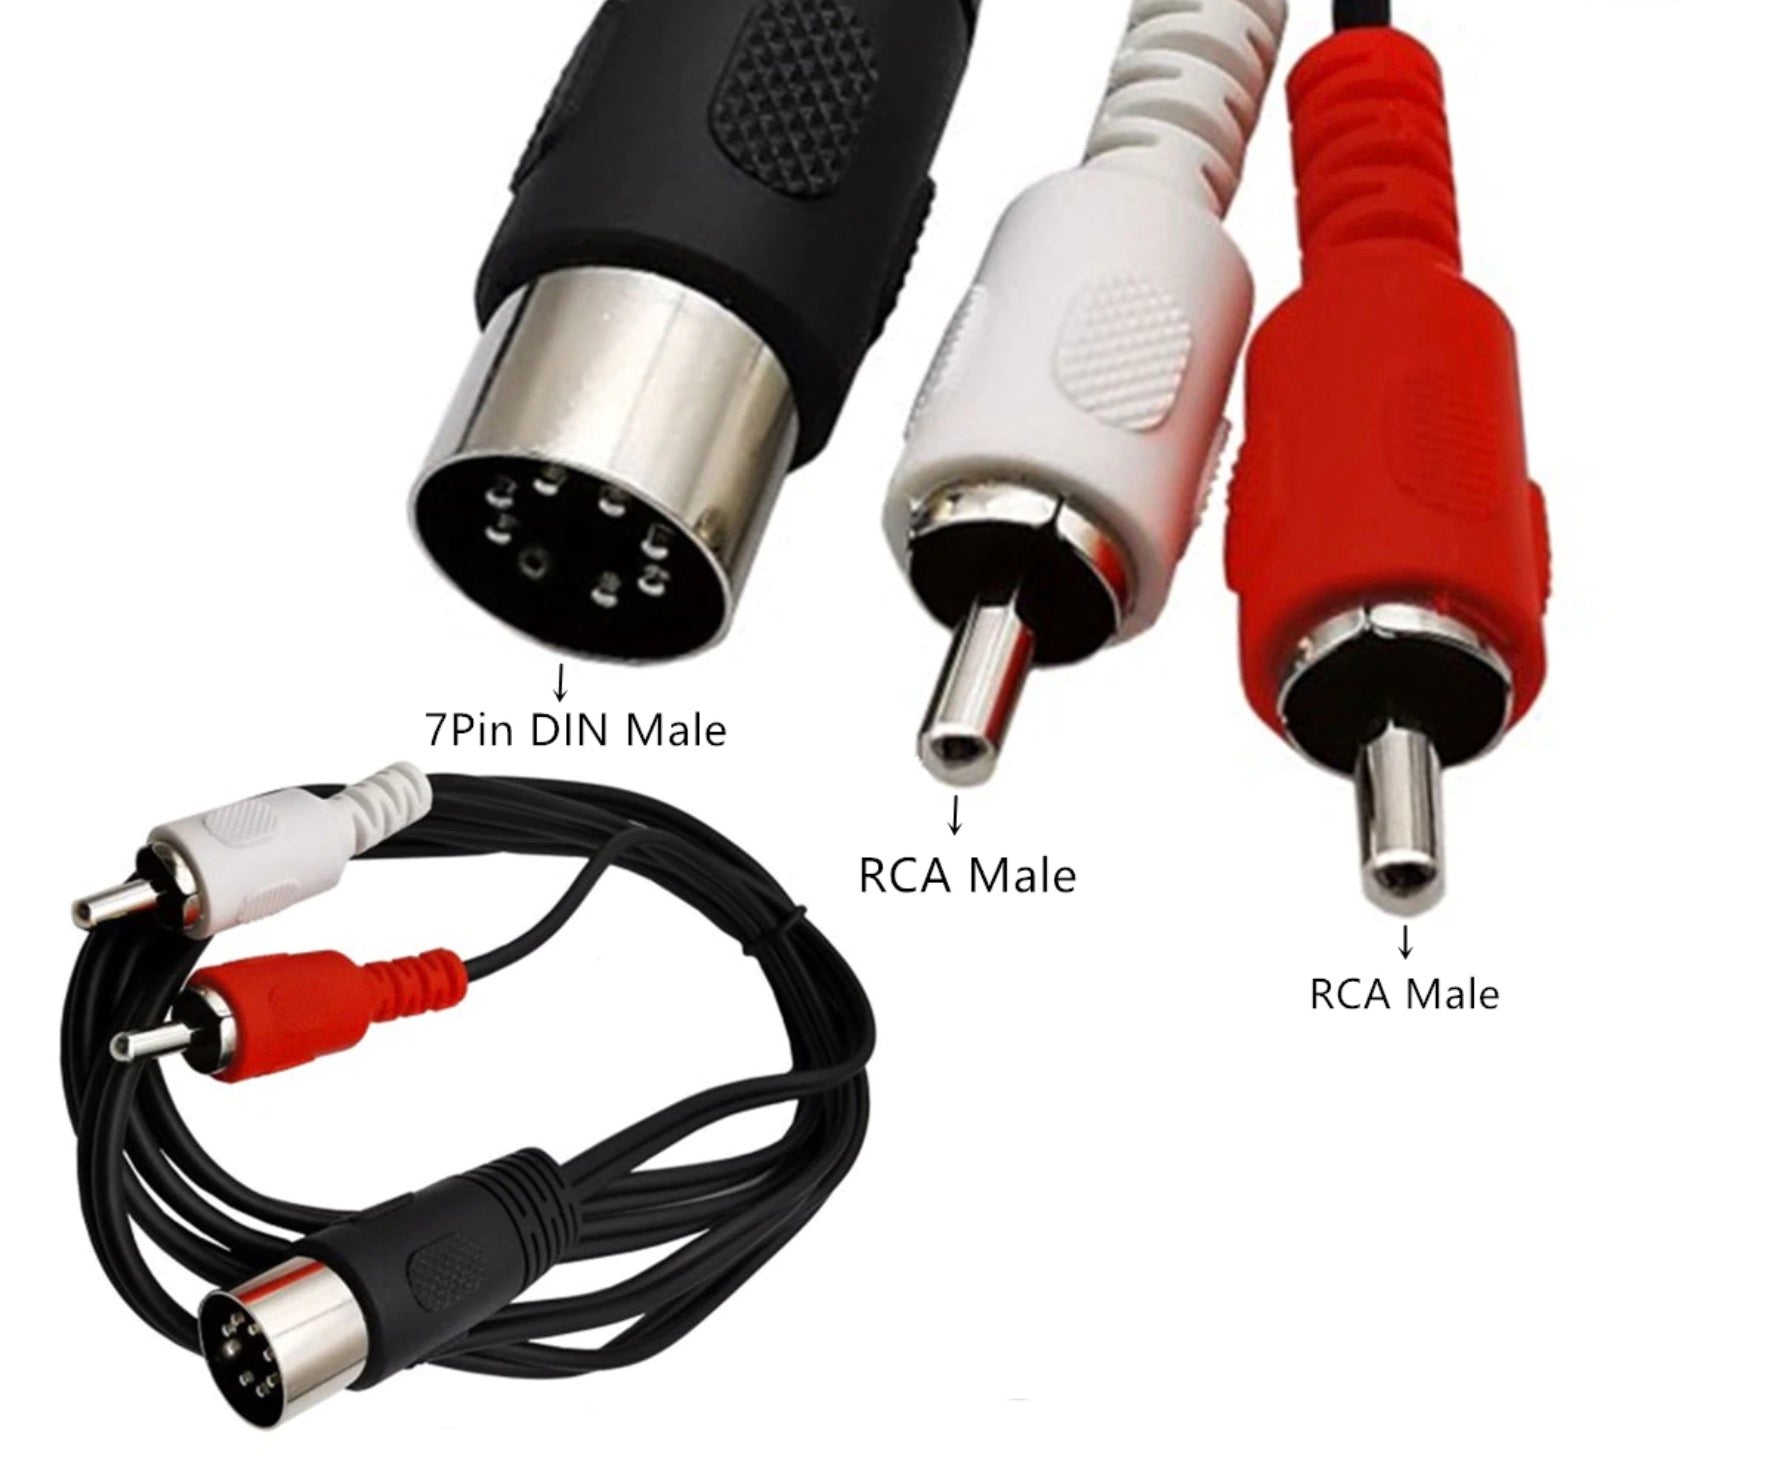 7 Pin DIN Male to 2-RCA Male Audio Connector Lead for Bang Olufsen